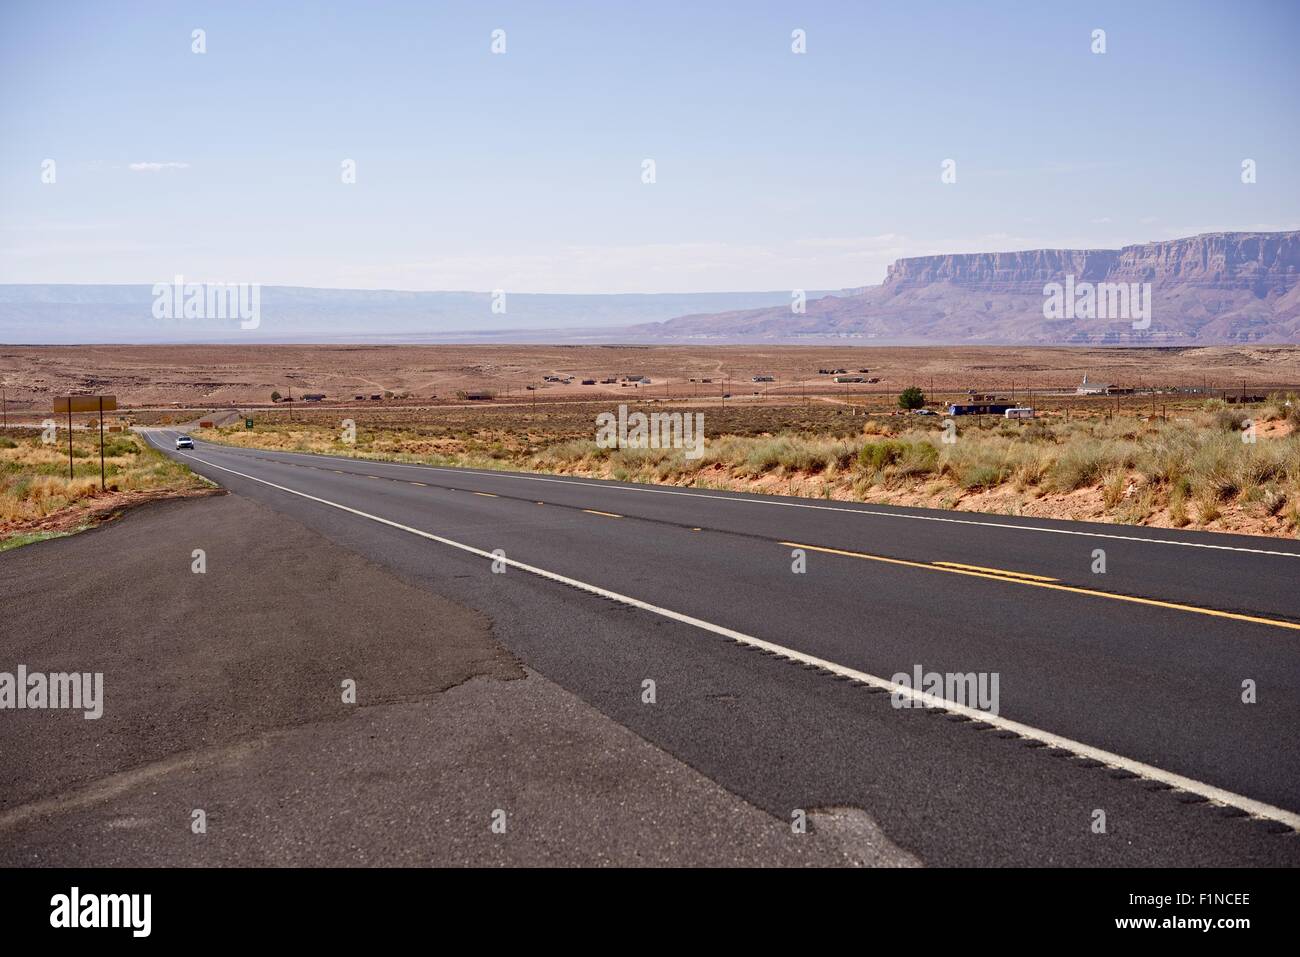 Somewhere in Arizona, USA. Arizona State Landscape with Highway. Hot Summer Day in Indian Reservation. Travels Photo Collection Stock Photo